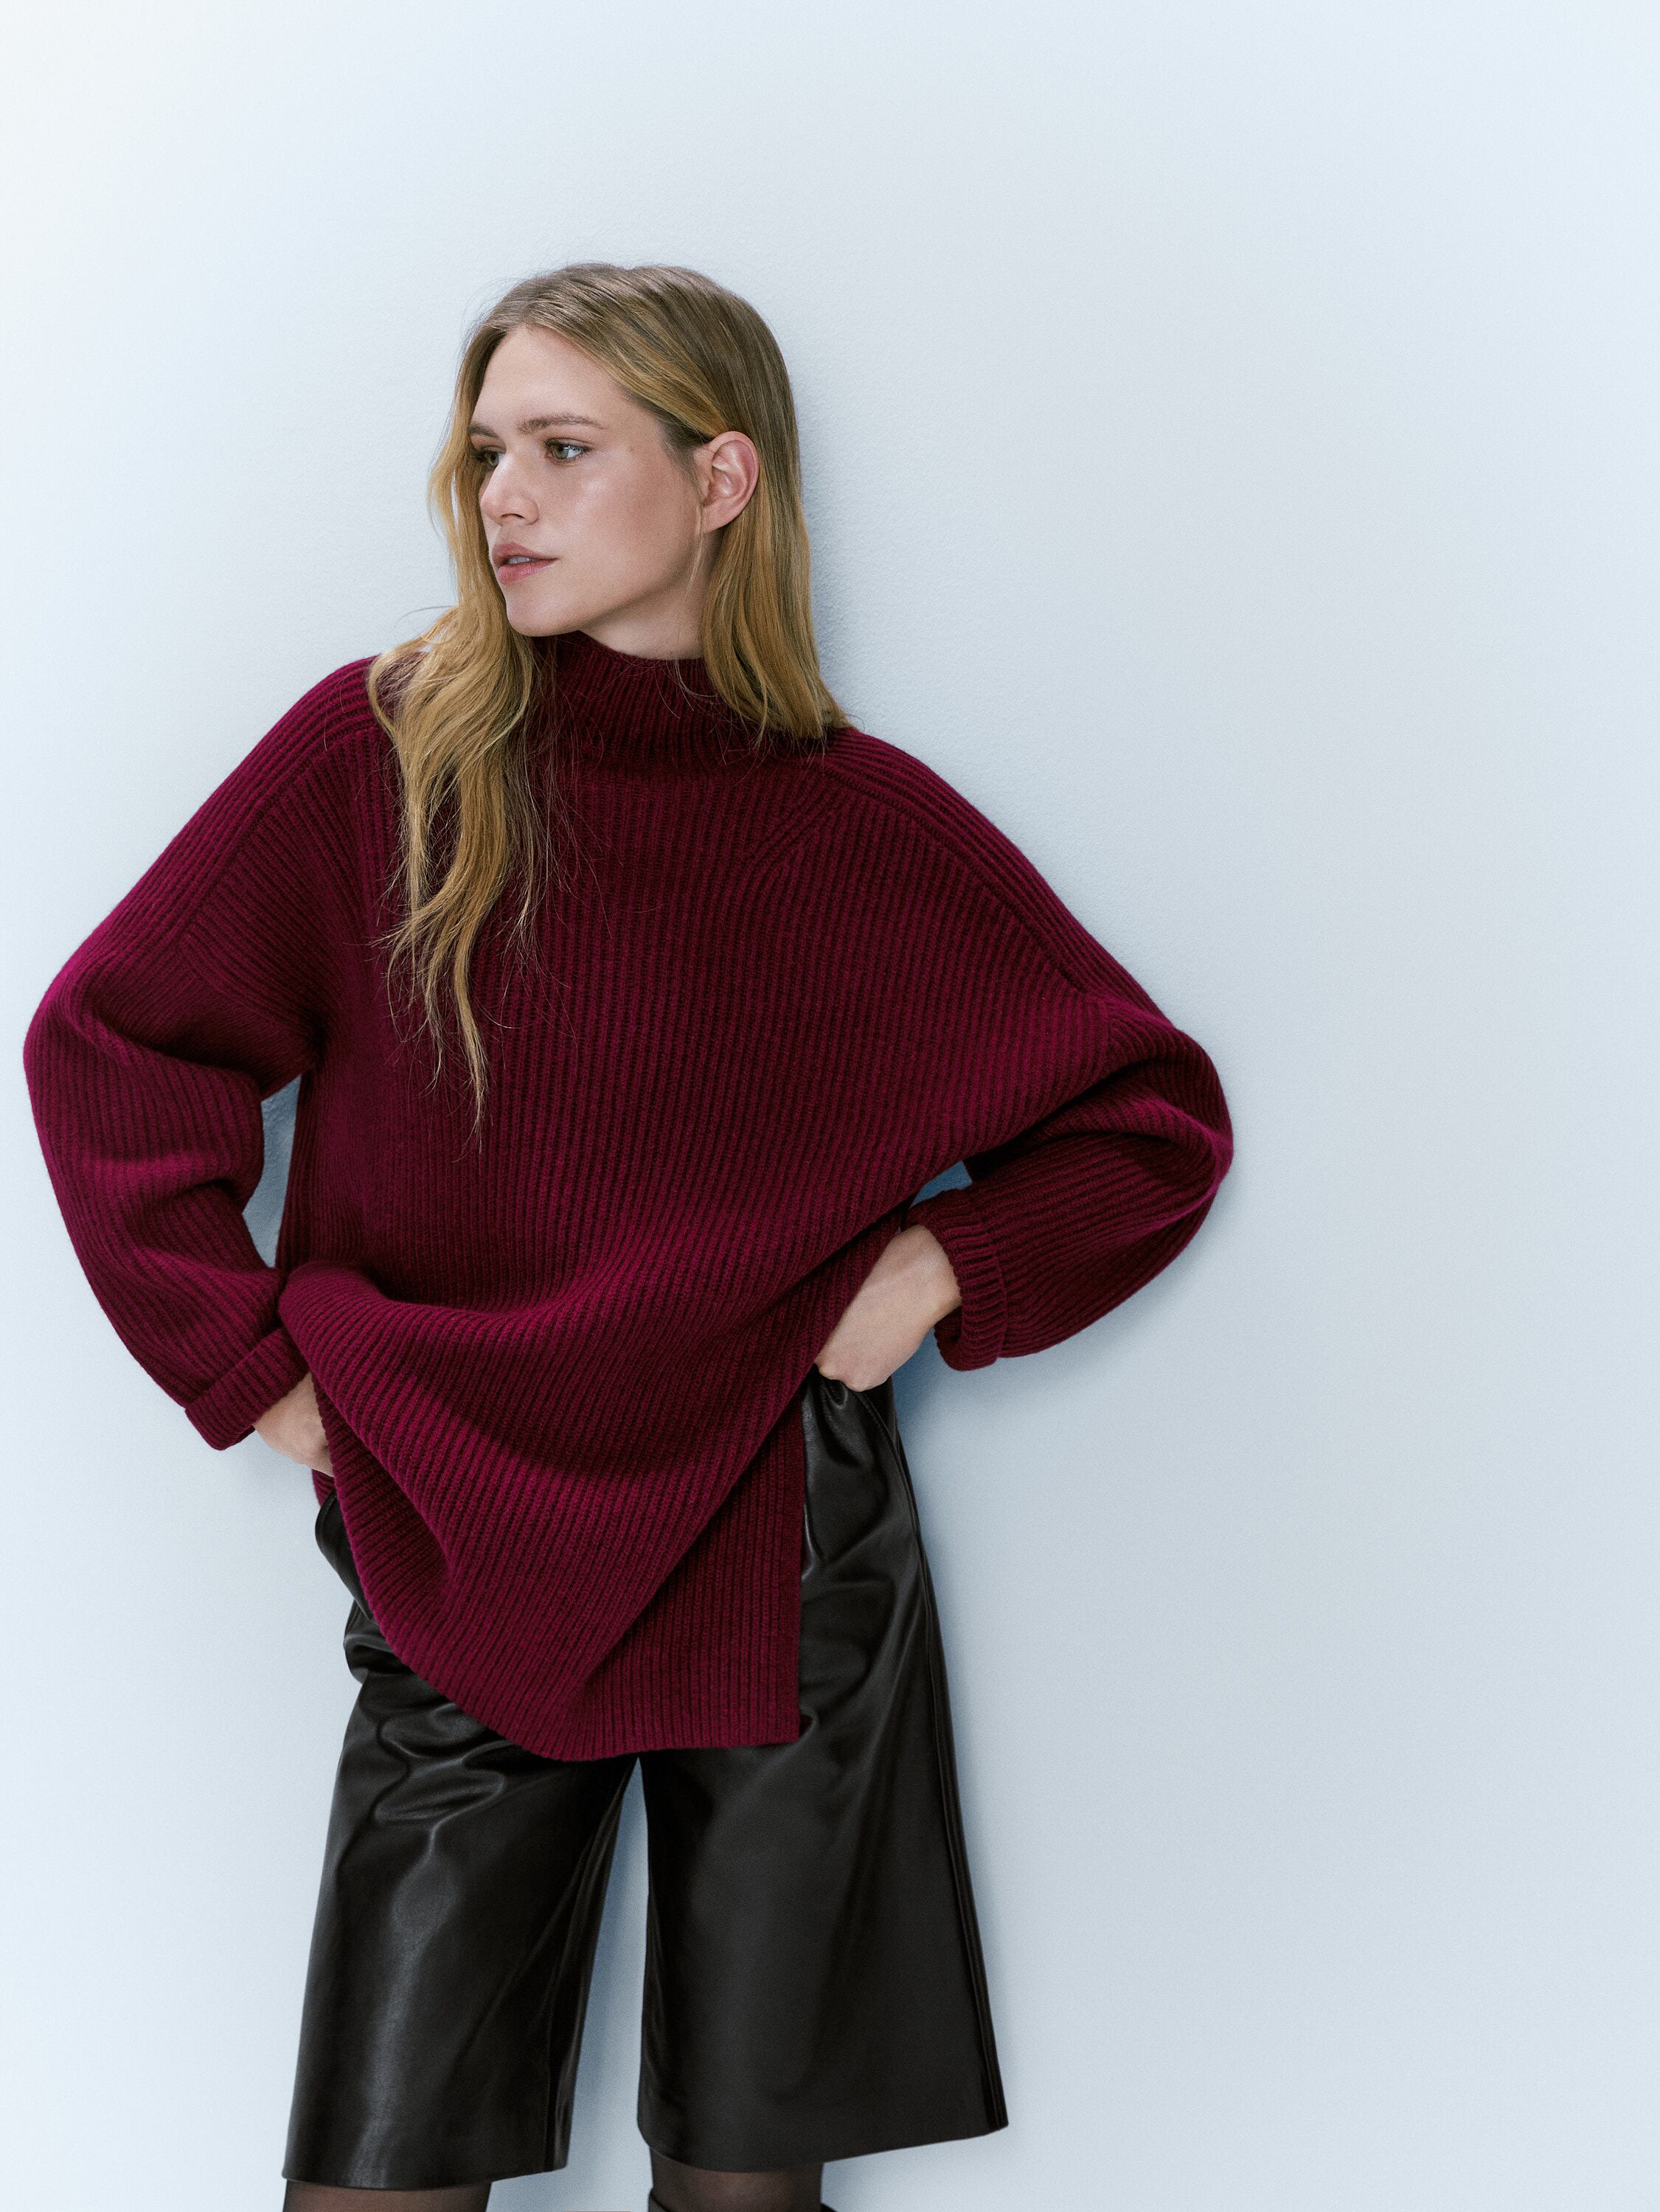 High neck sweater with side vents